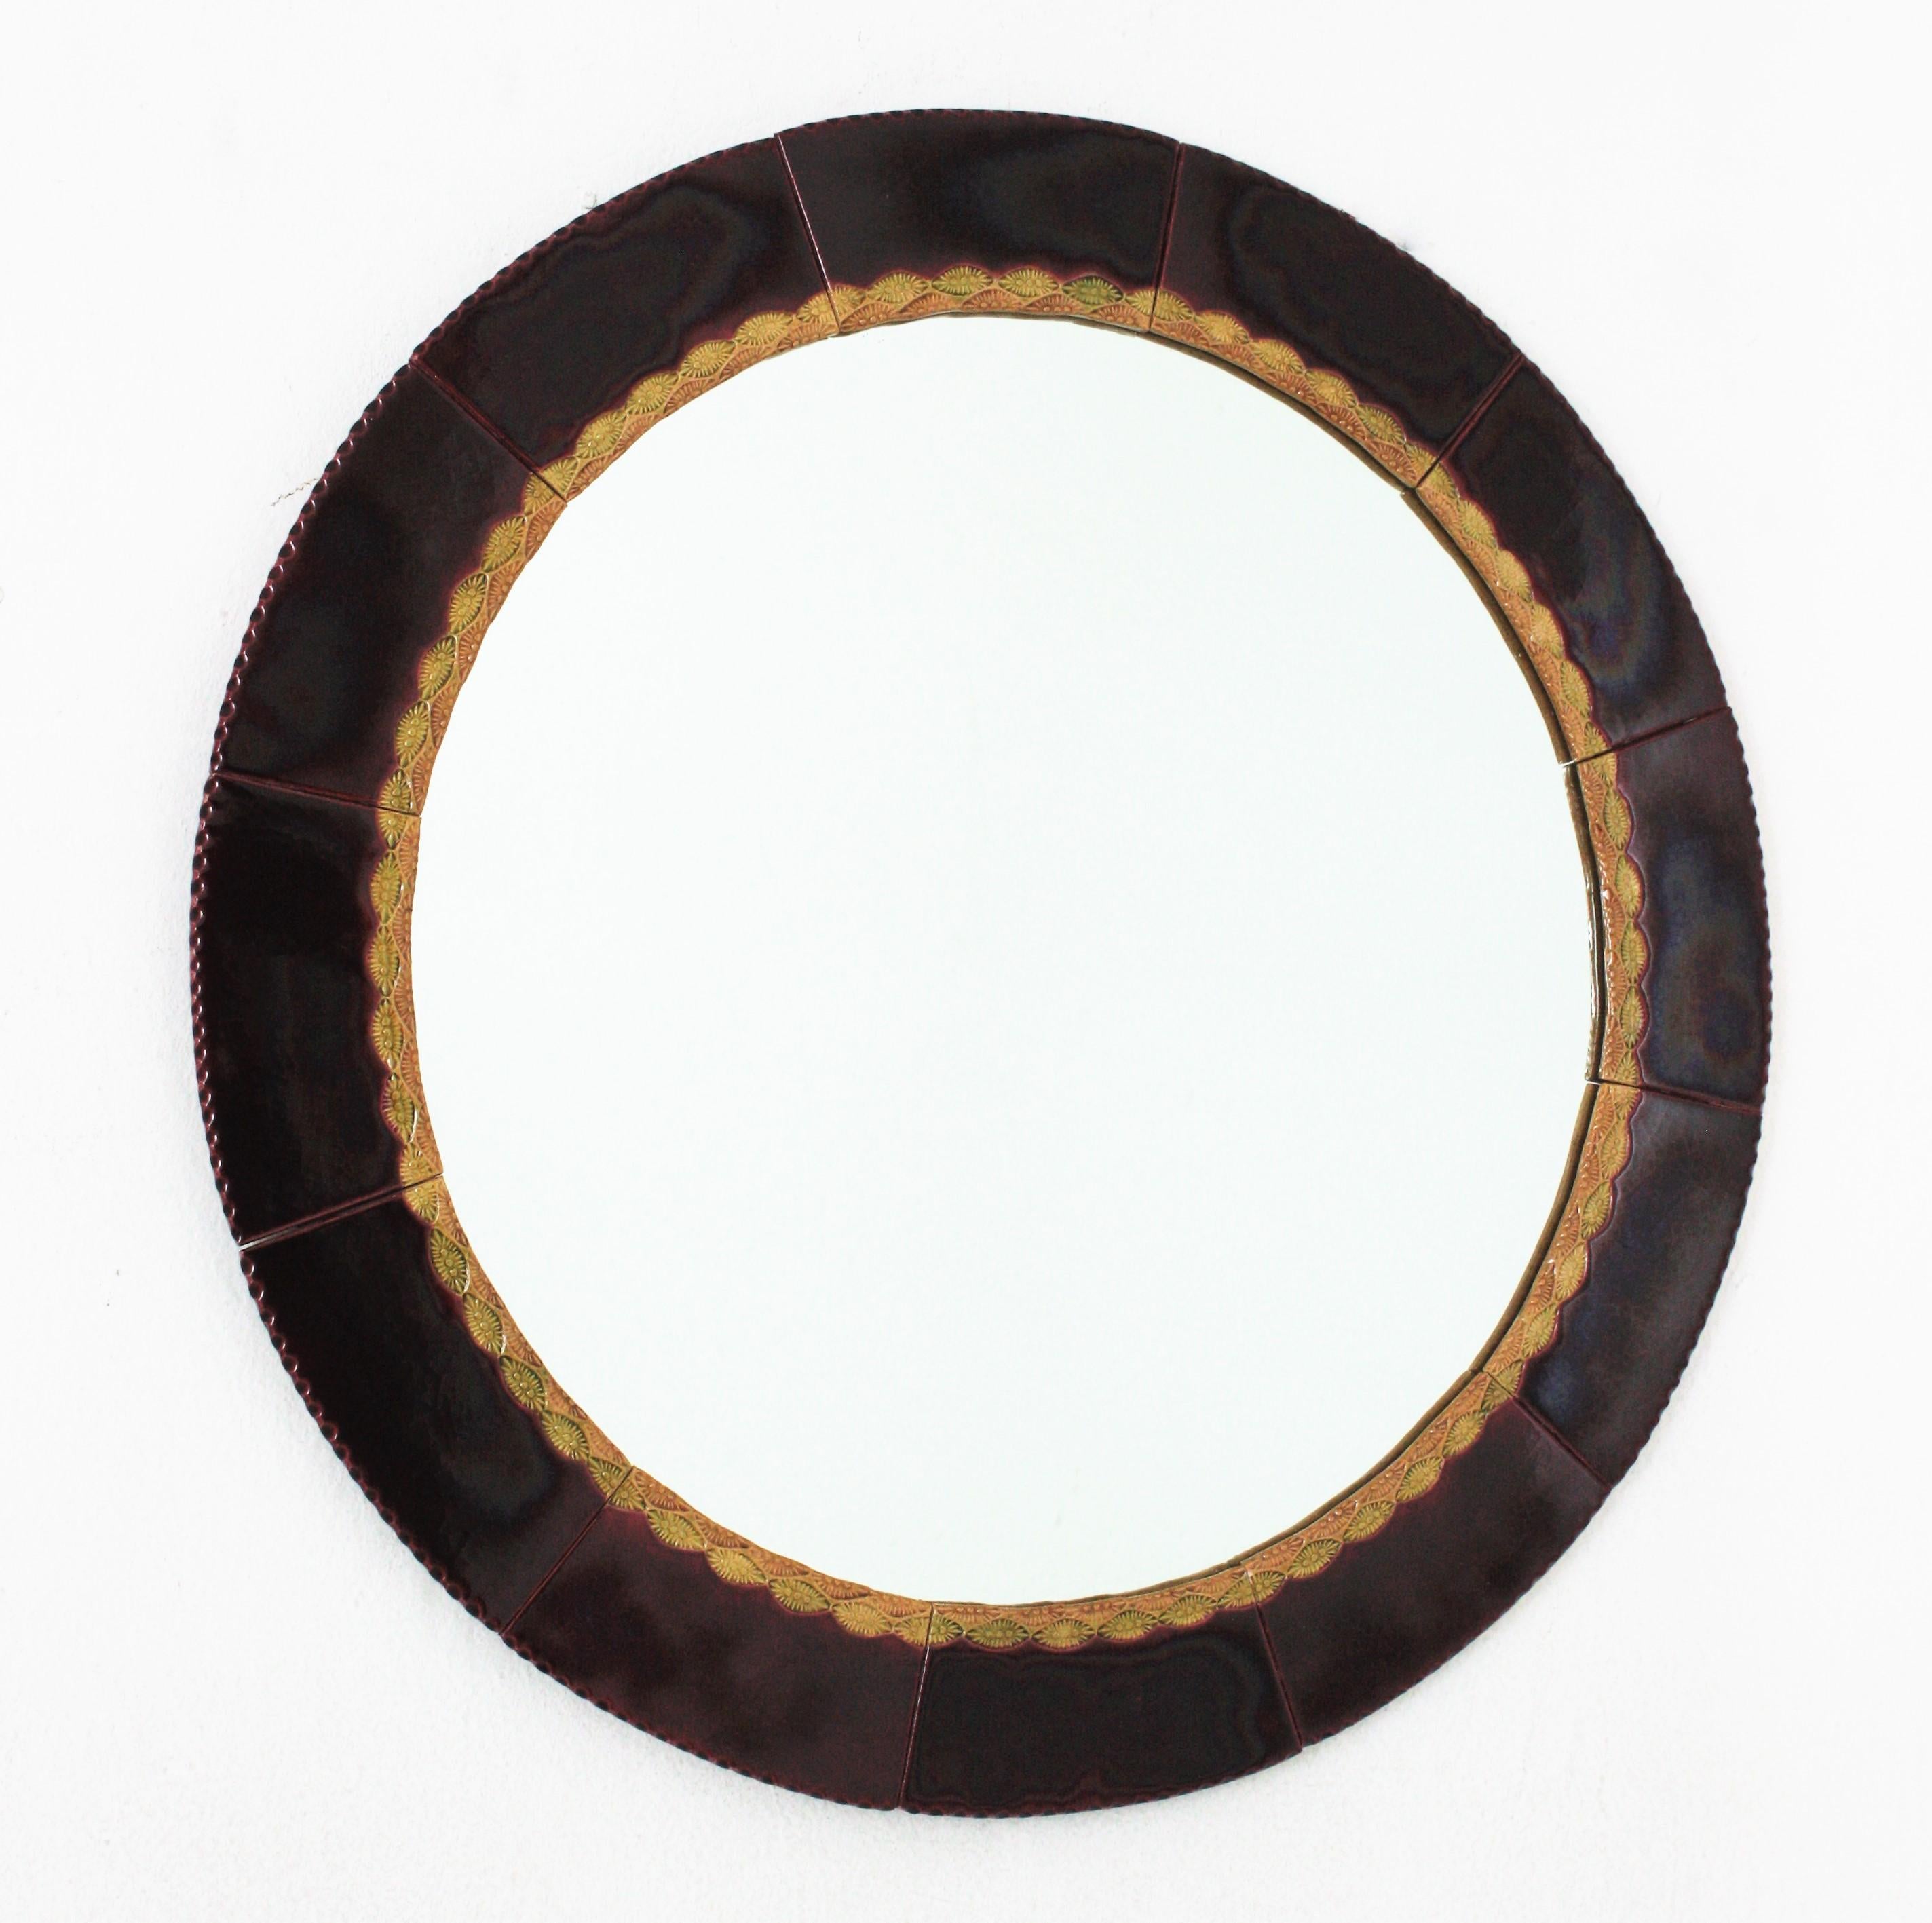 Eye-catching ceramic wall mirror. Maufactured in Spain, 1960s.
Circular Shape and large glass mirror surface.
The frame is made of glazed ceramic tiles in shades of burgundy / garnet. A decorative pattern in amber an yellow colors surrounds the